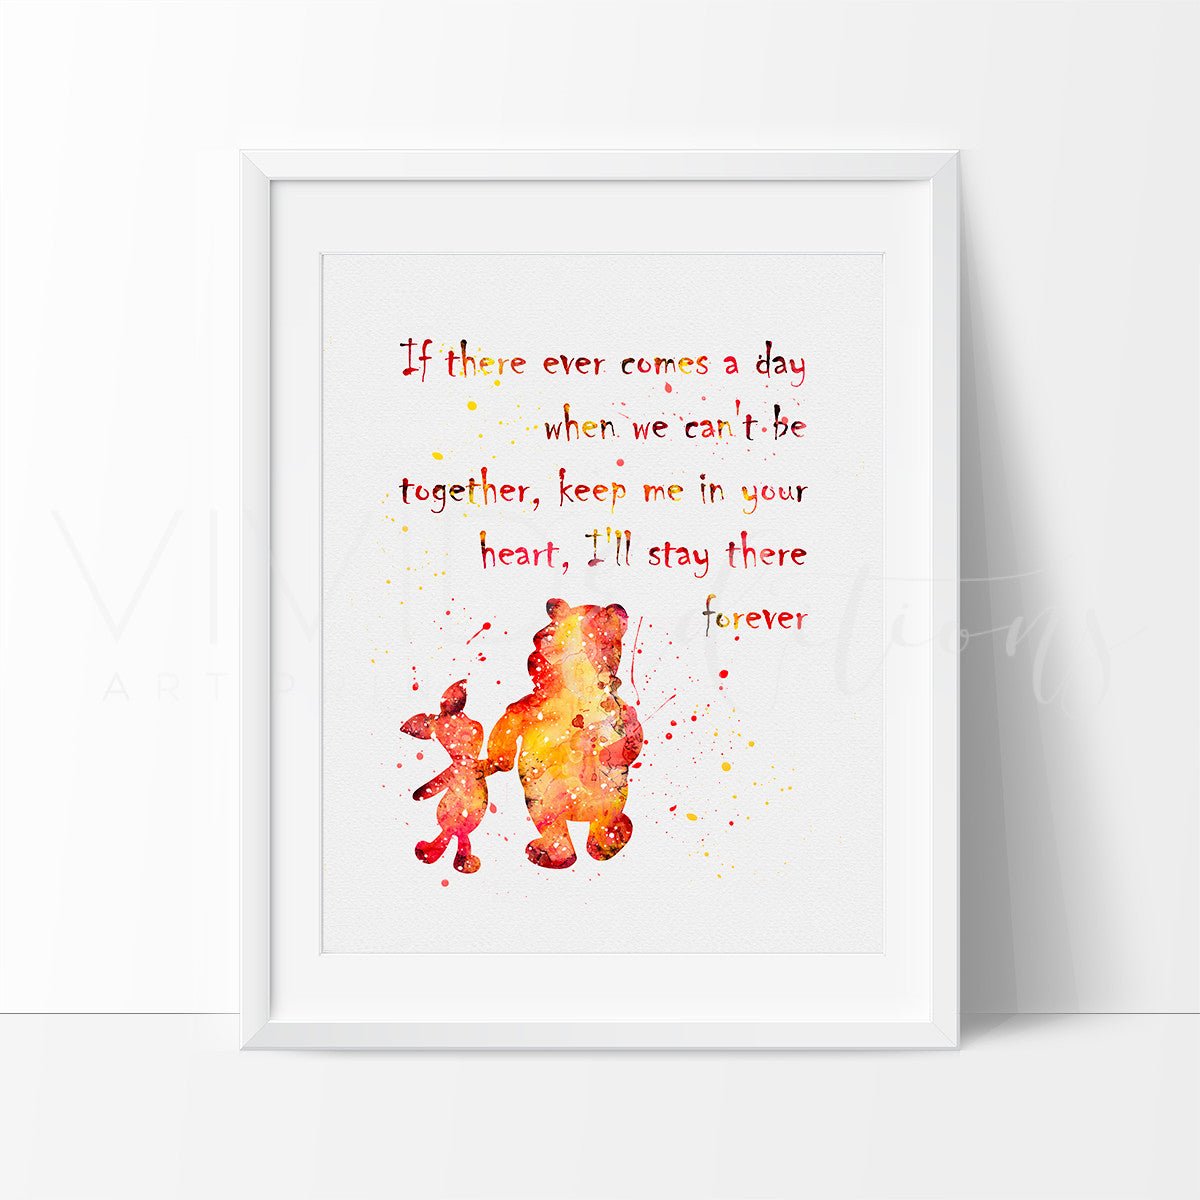 Winnie the Pooh Quote Watercolor Art Print Print - VividEditions